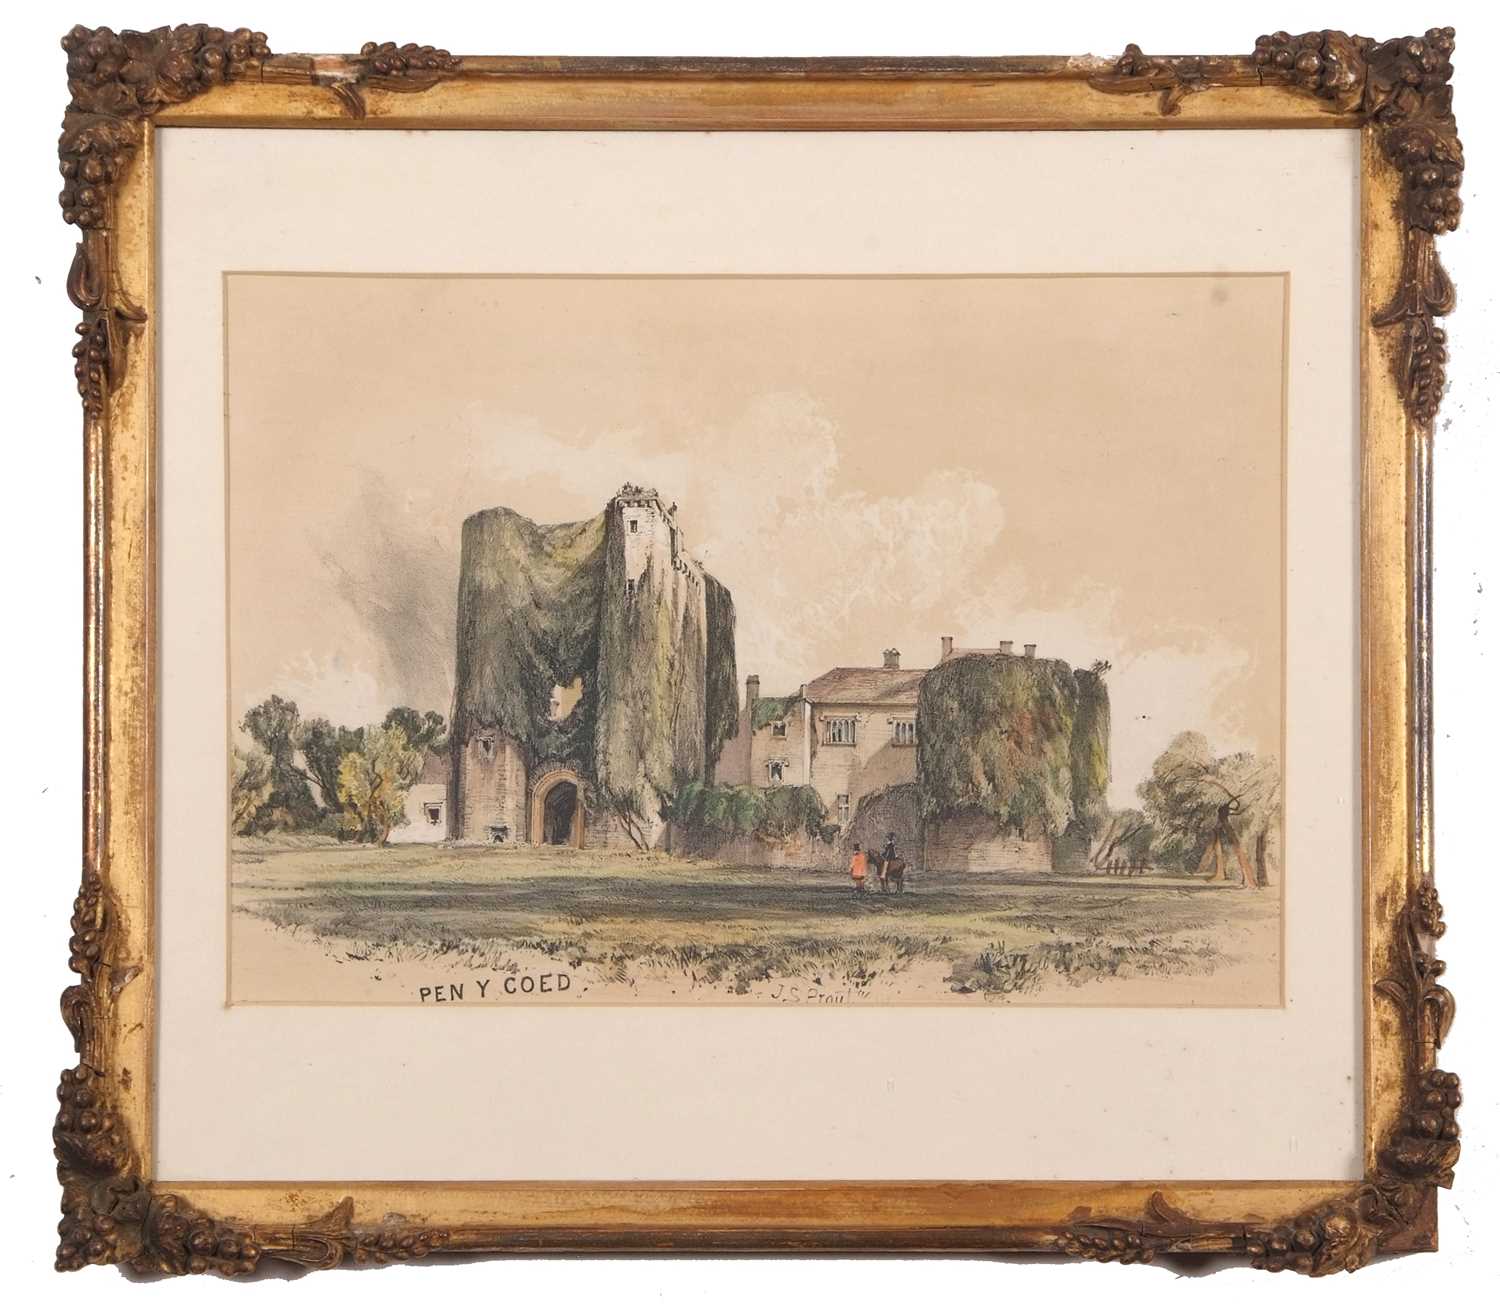 John Skinner Prout (1805-1876), "Pen y Coed Castle", hand coloured lithograph, 22x30cm, framed and - Image 2 of 3